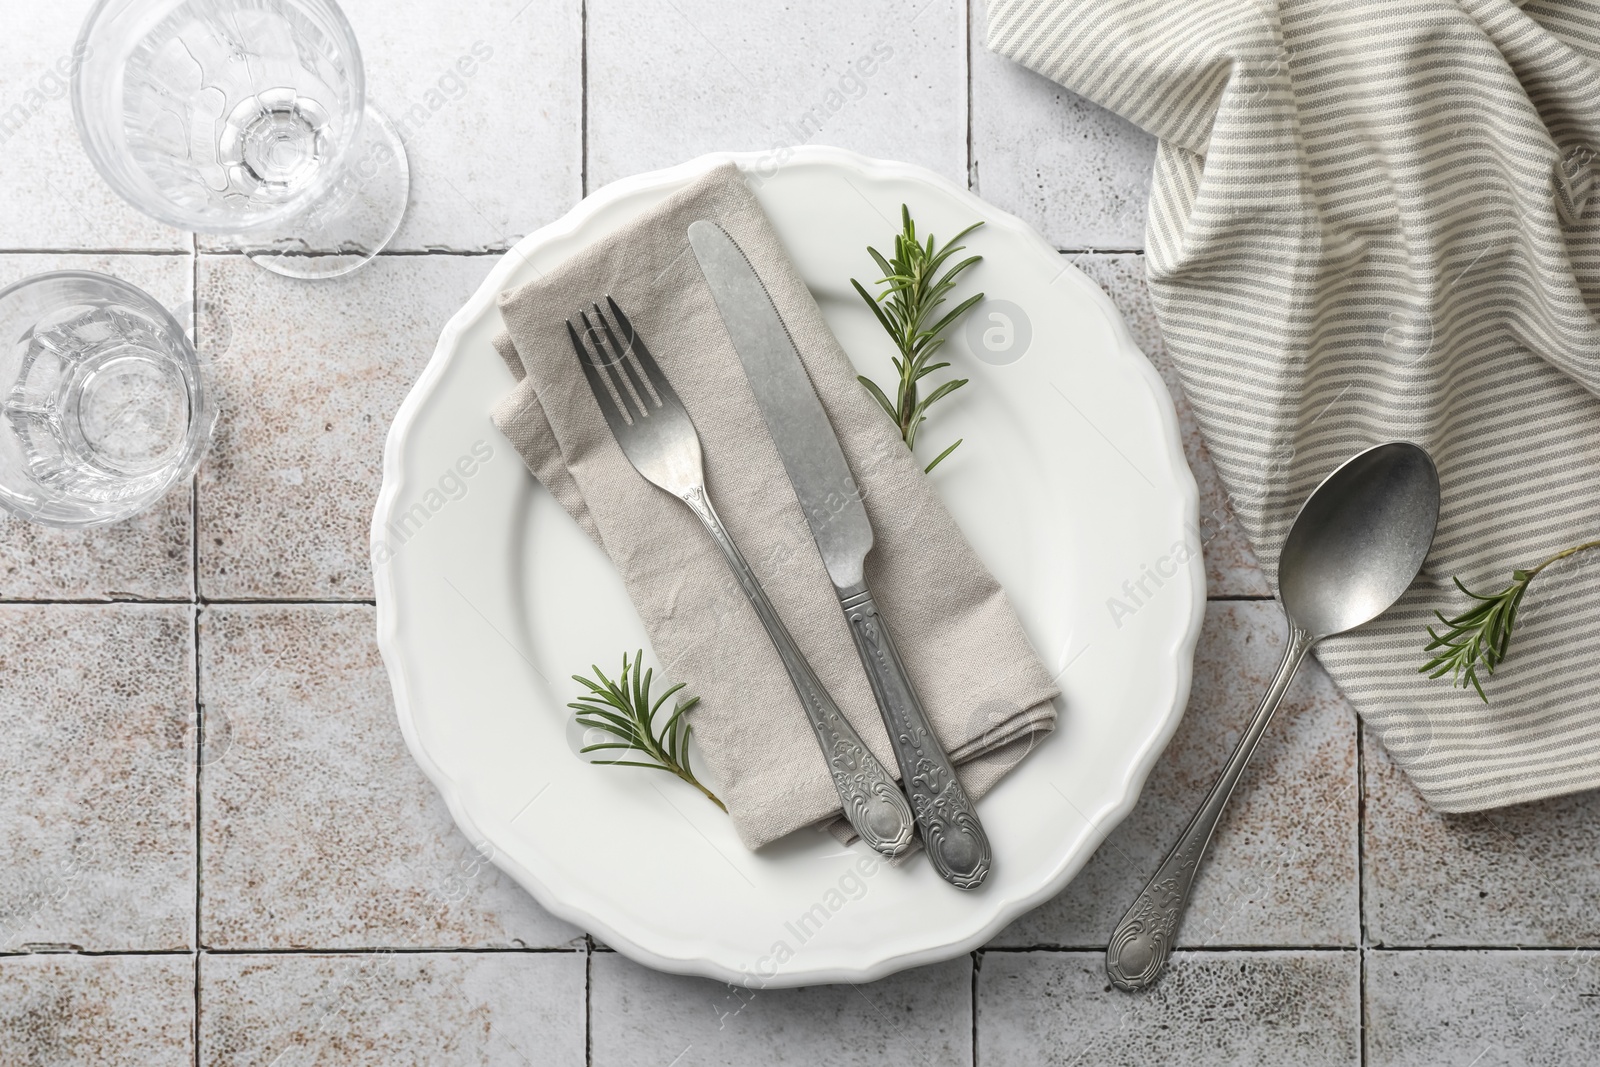 Photo of Stylish setting with cutlery, napkin, rosemary and plate on light tiled table, top view